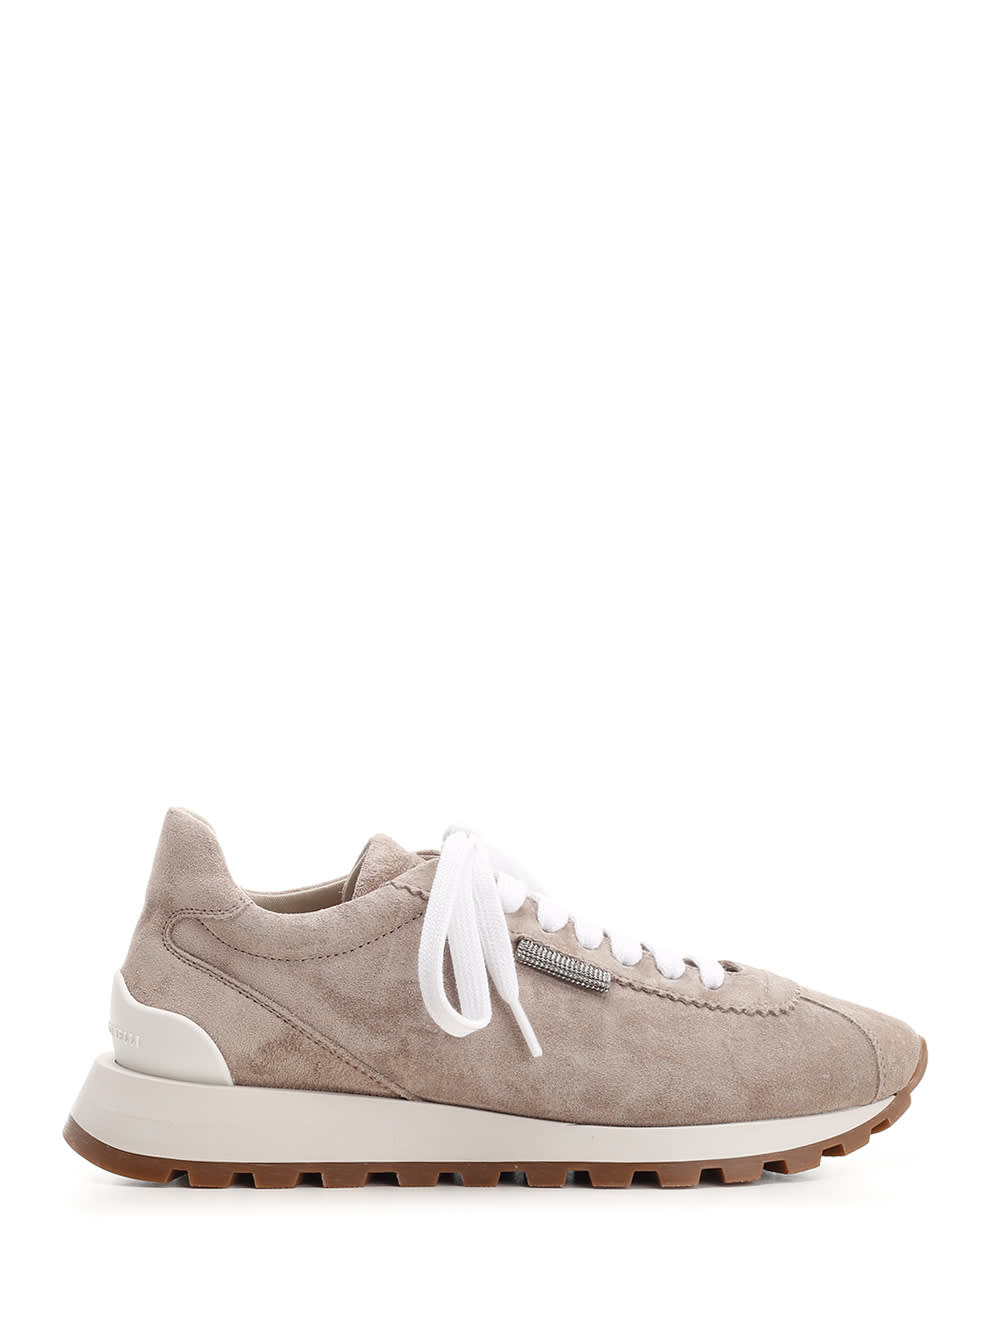 BRUNELLO CUCINELLI SHINY TAB SUEDE SNEAKERS